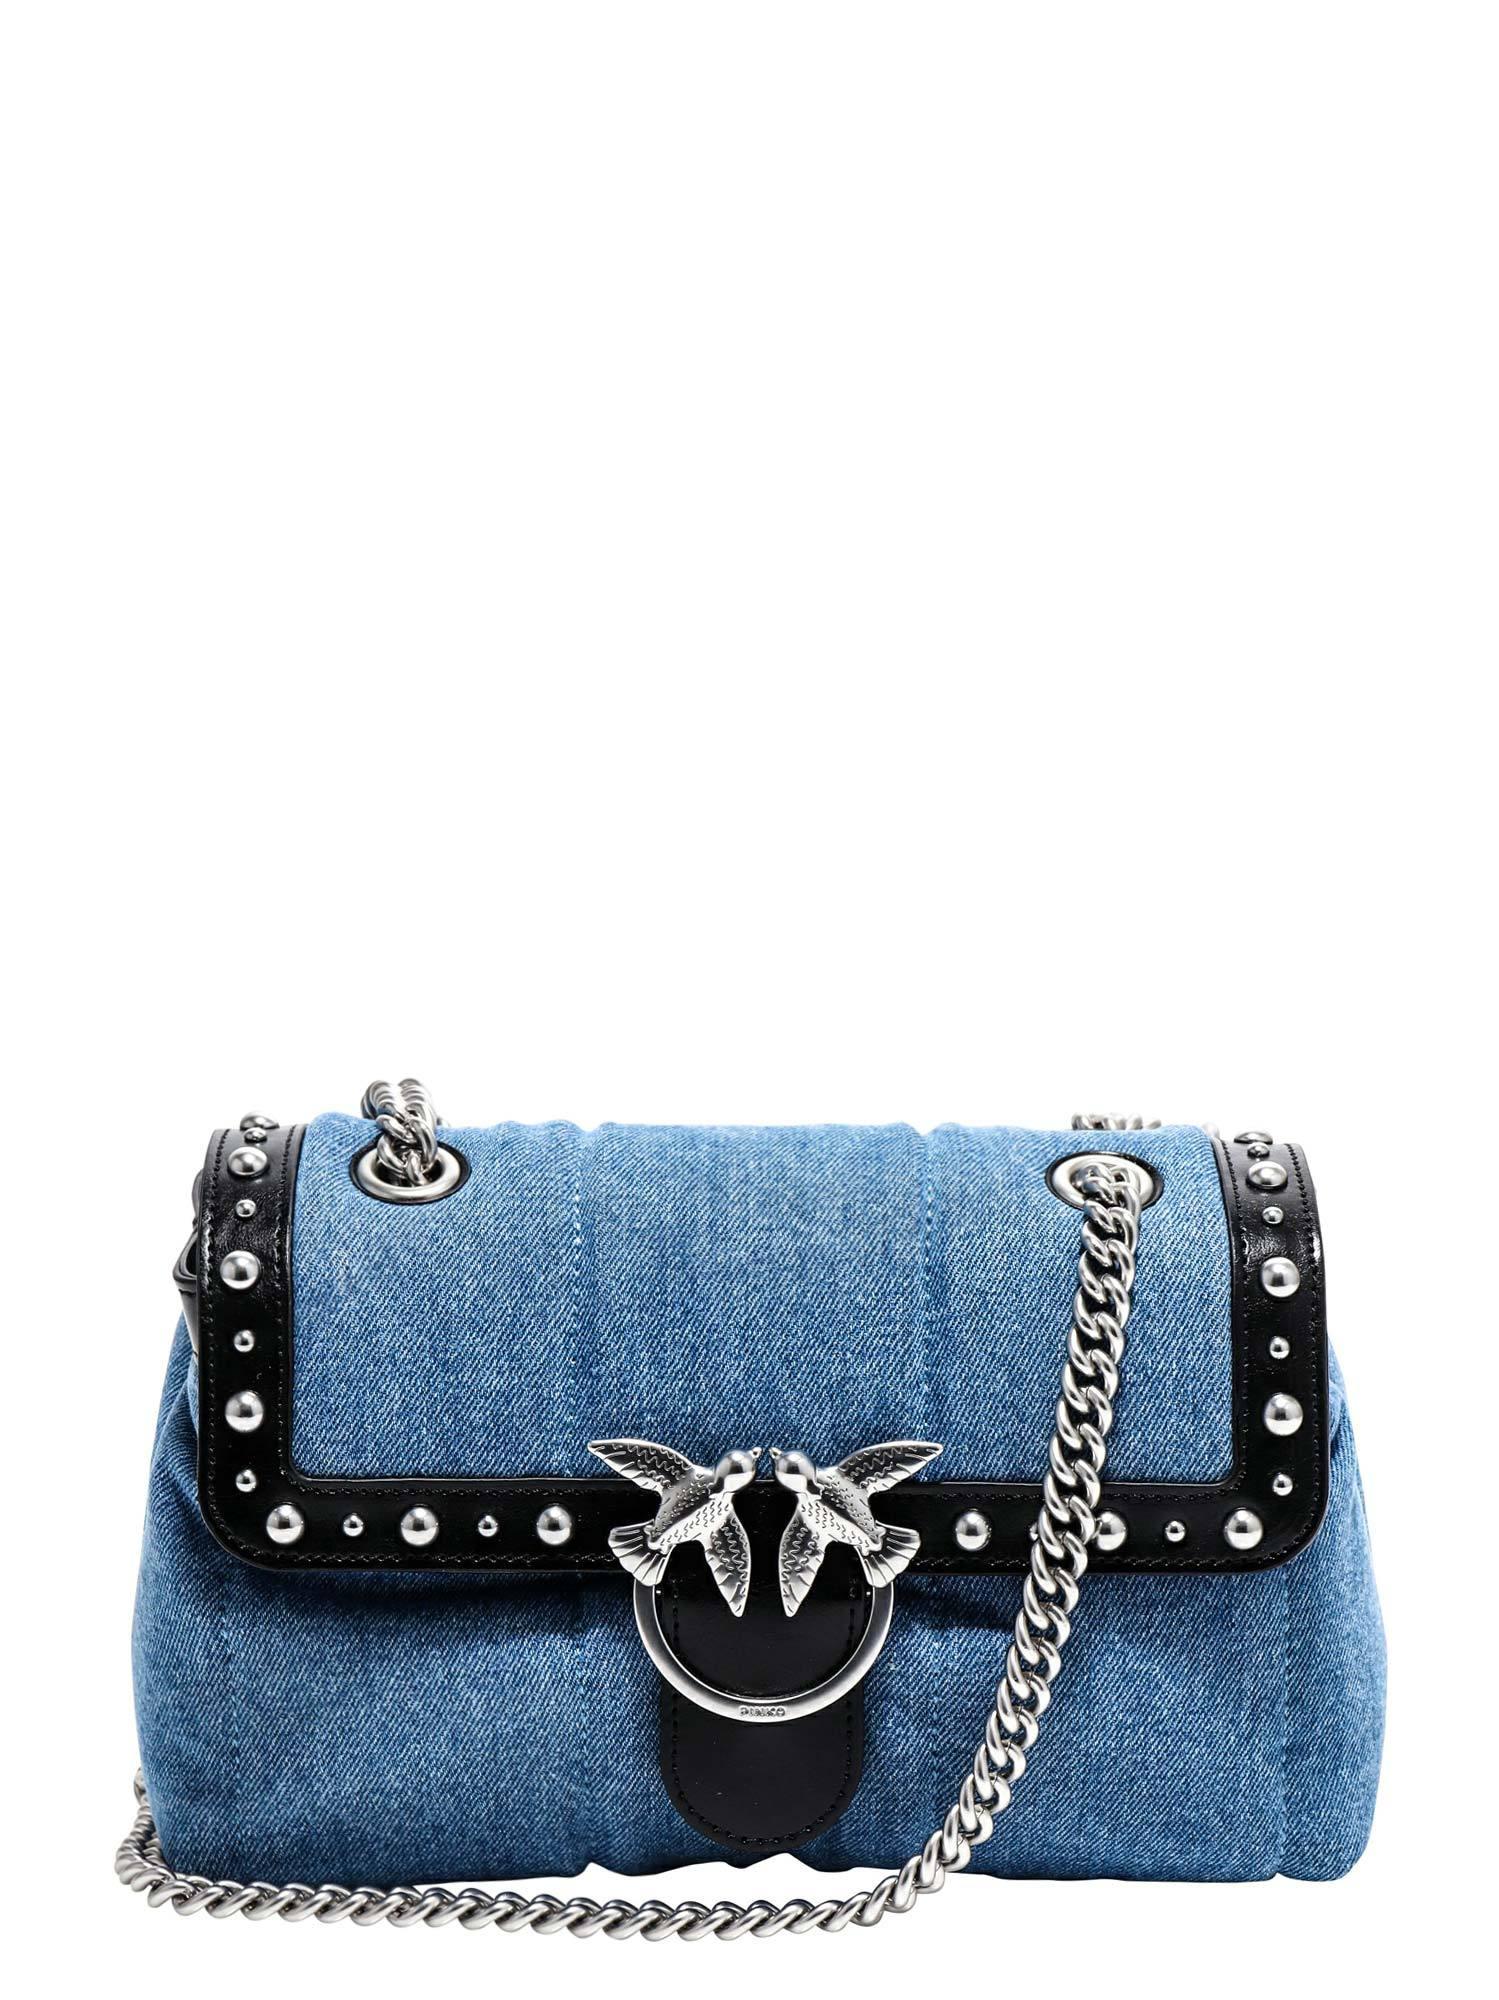 Pinko Love Puff Jeans Shoulder Bag in Blue | Lyst